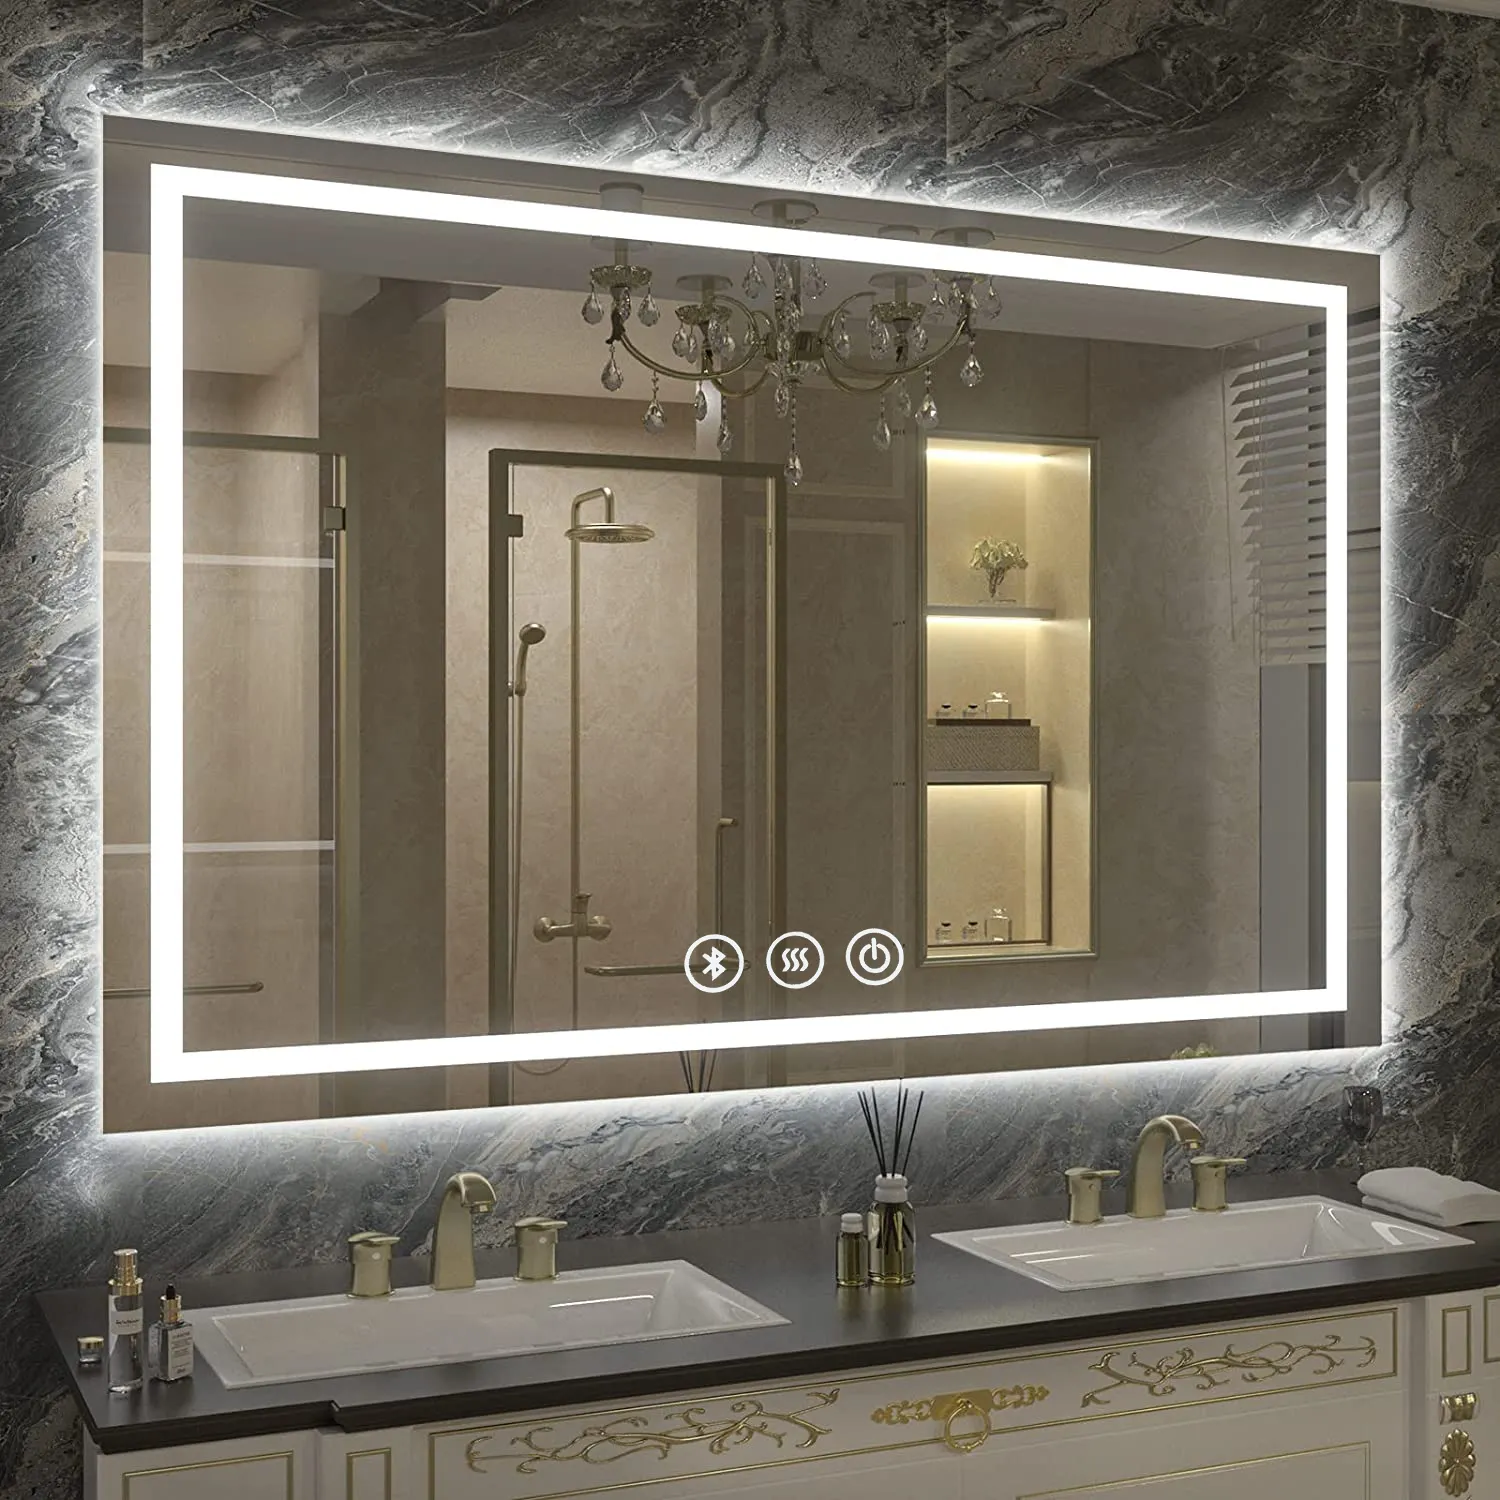 touch screen led bath smart mirror for bathroom bathroom make up light led mirror bathroom mirror with led light